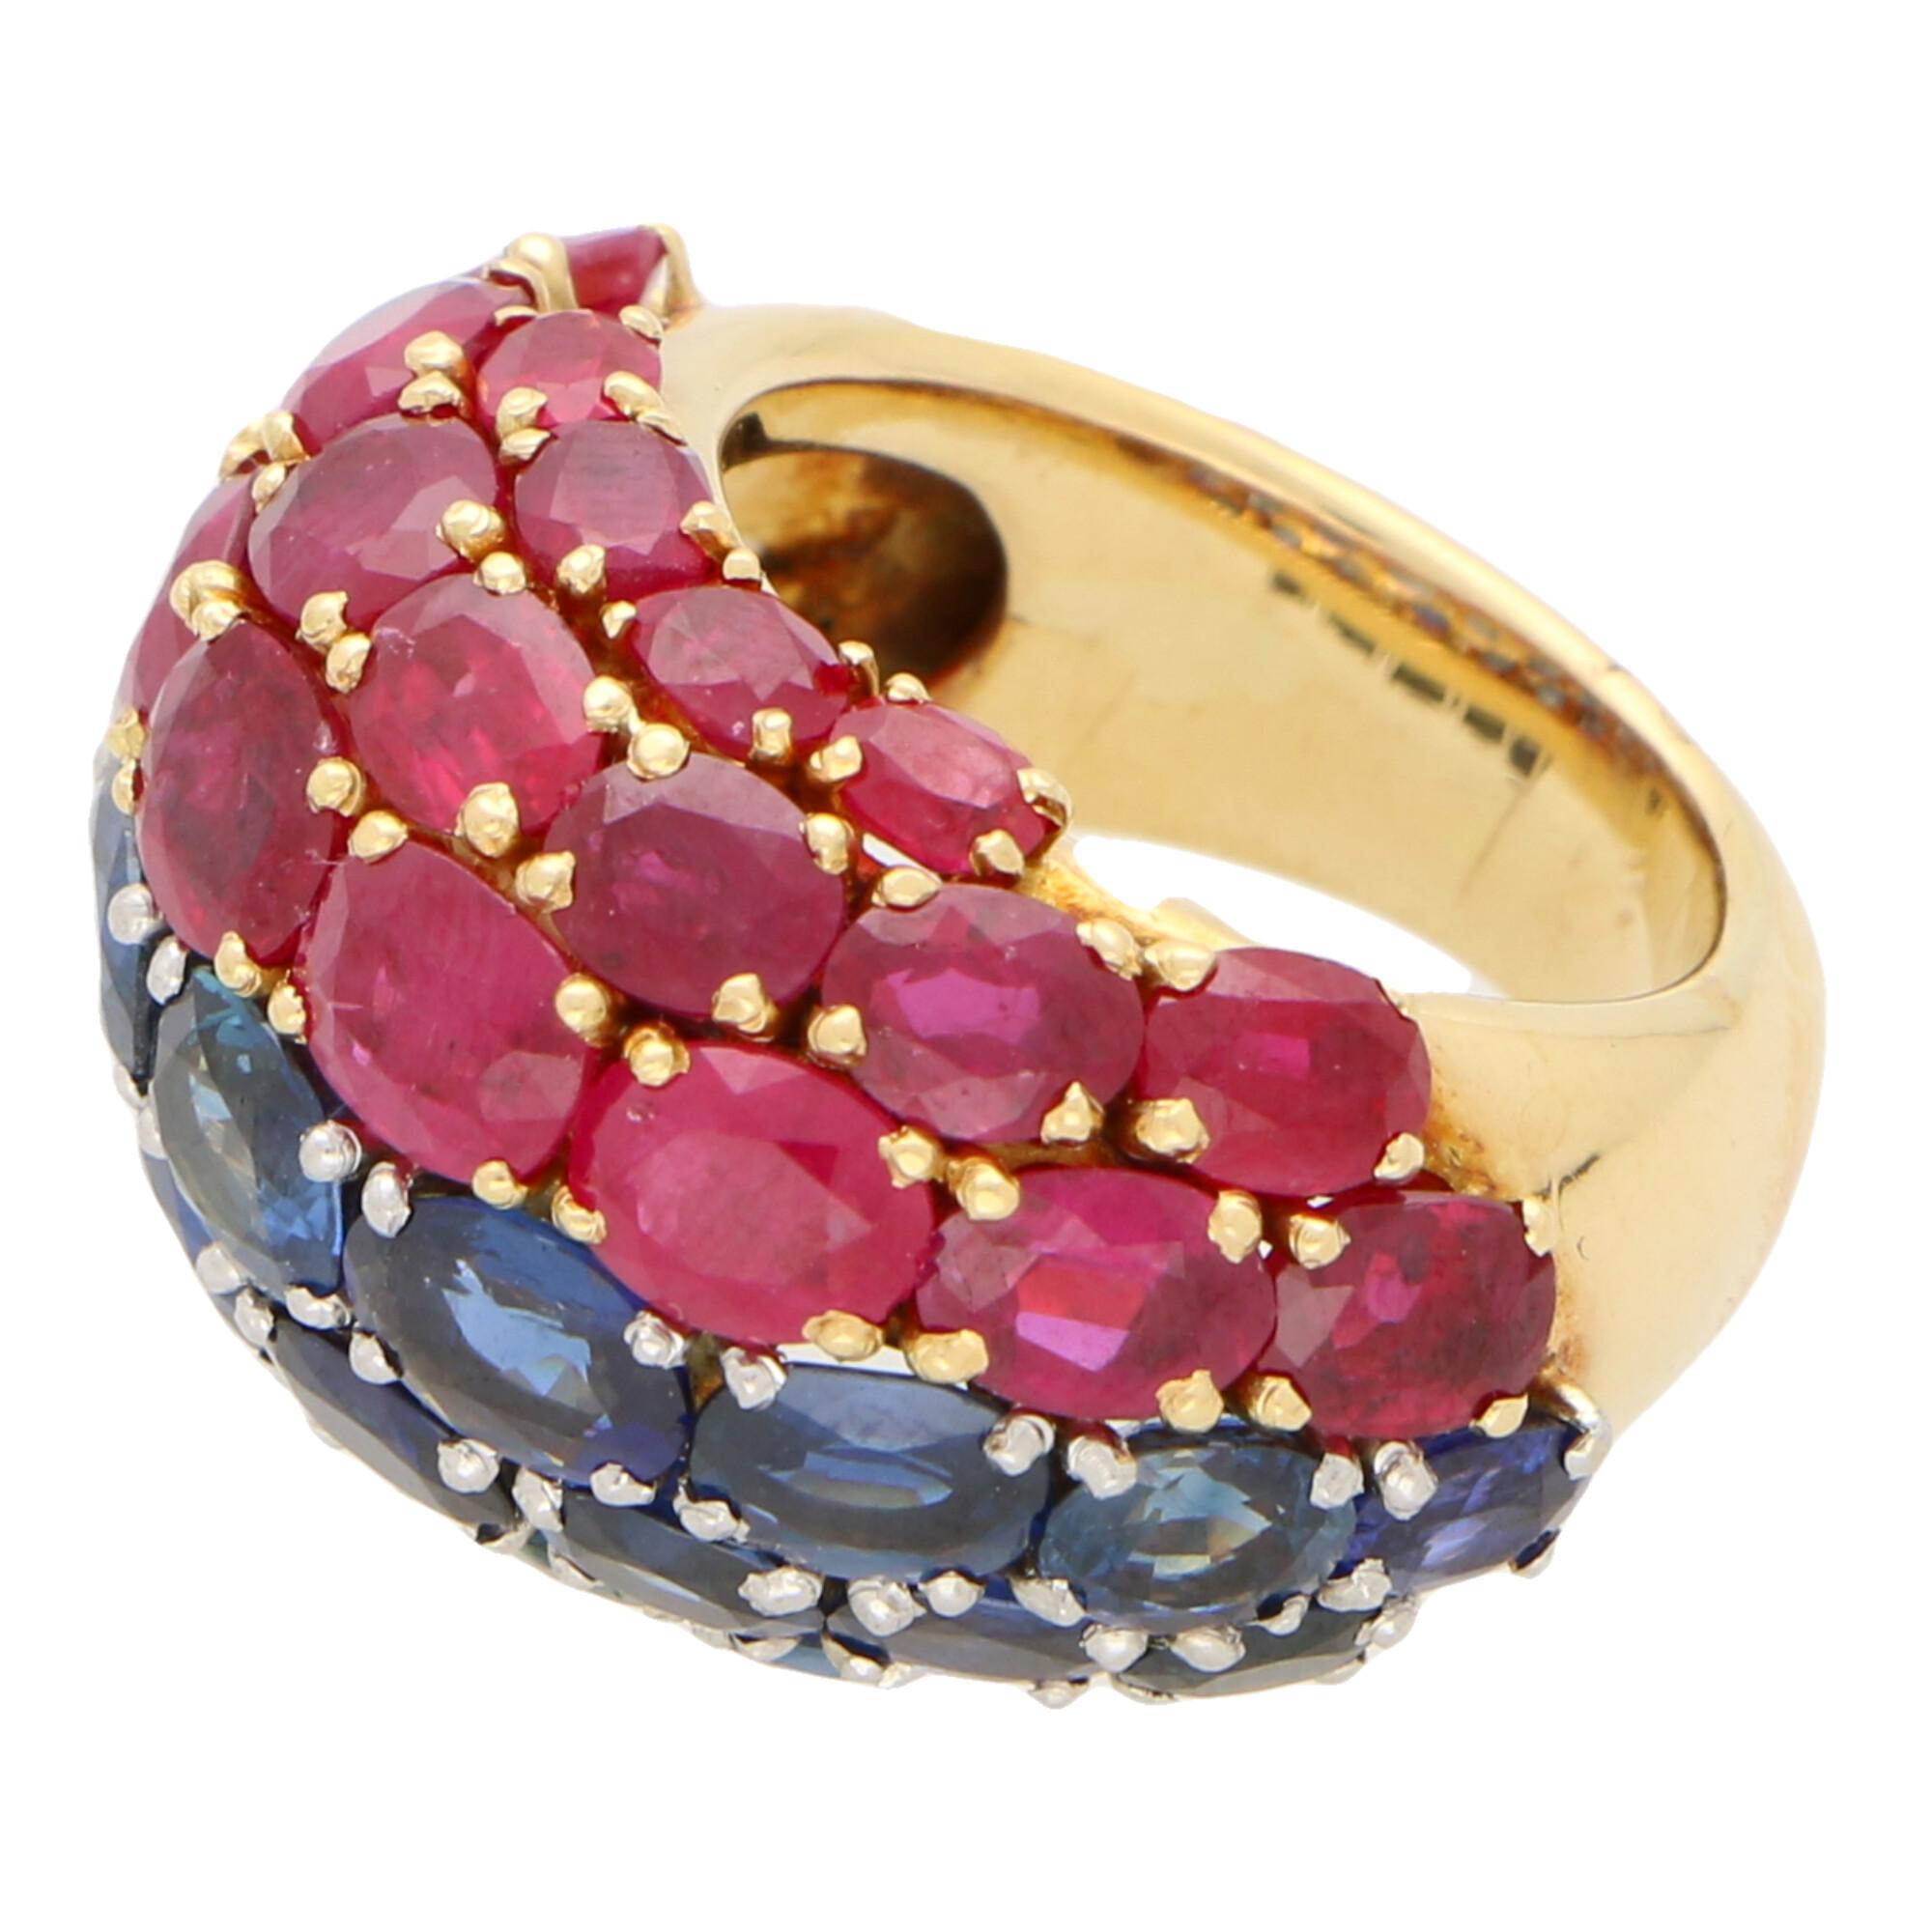 A highly unique ruby and sapphire bombe dress ring set in 18k yellow gold and platinum. 

The ring is firstly composed of 22 oval cut royal blue sapphires, all of which graduate ever-so slightly in size as the design travels across the finger. These